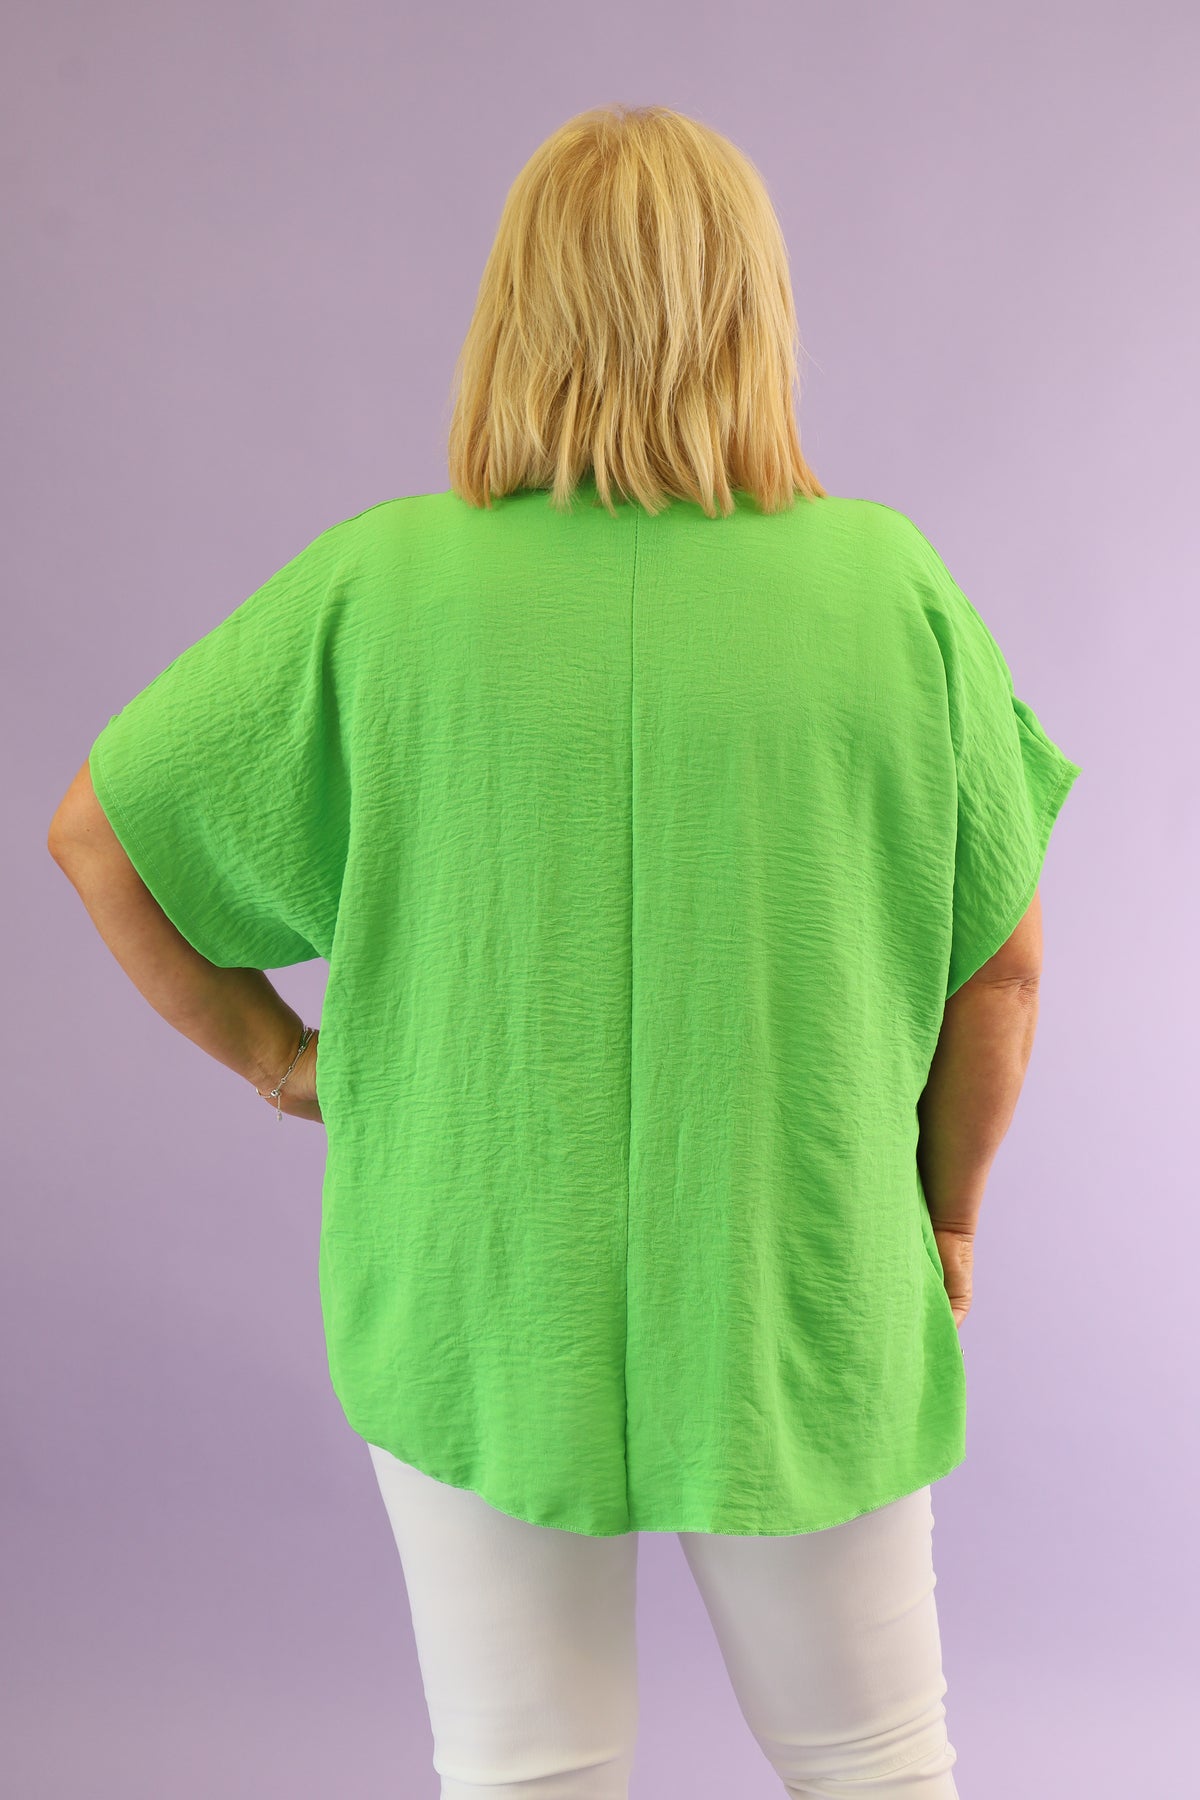 Ellie Blouse in Lime Green